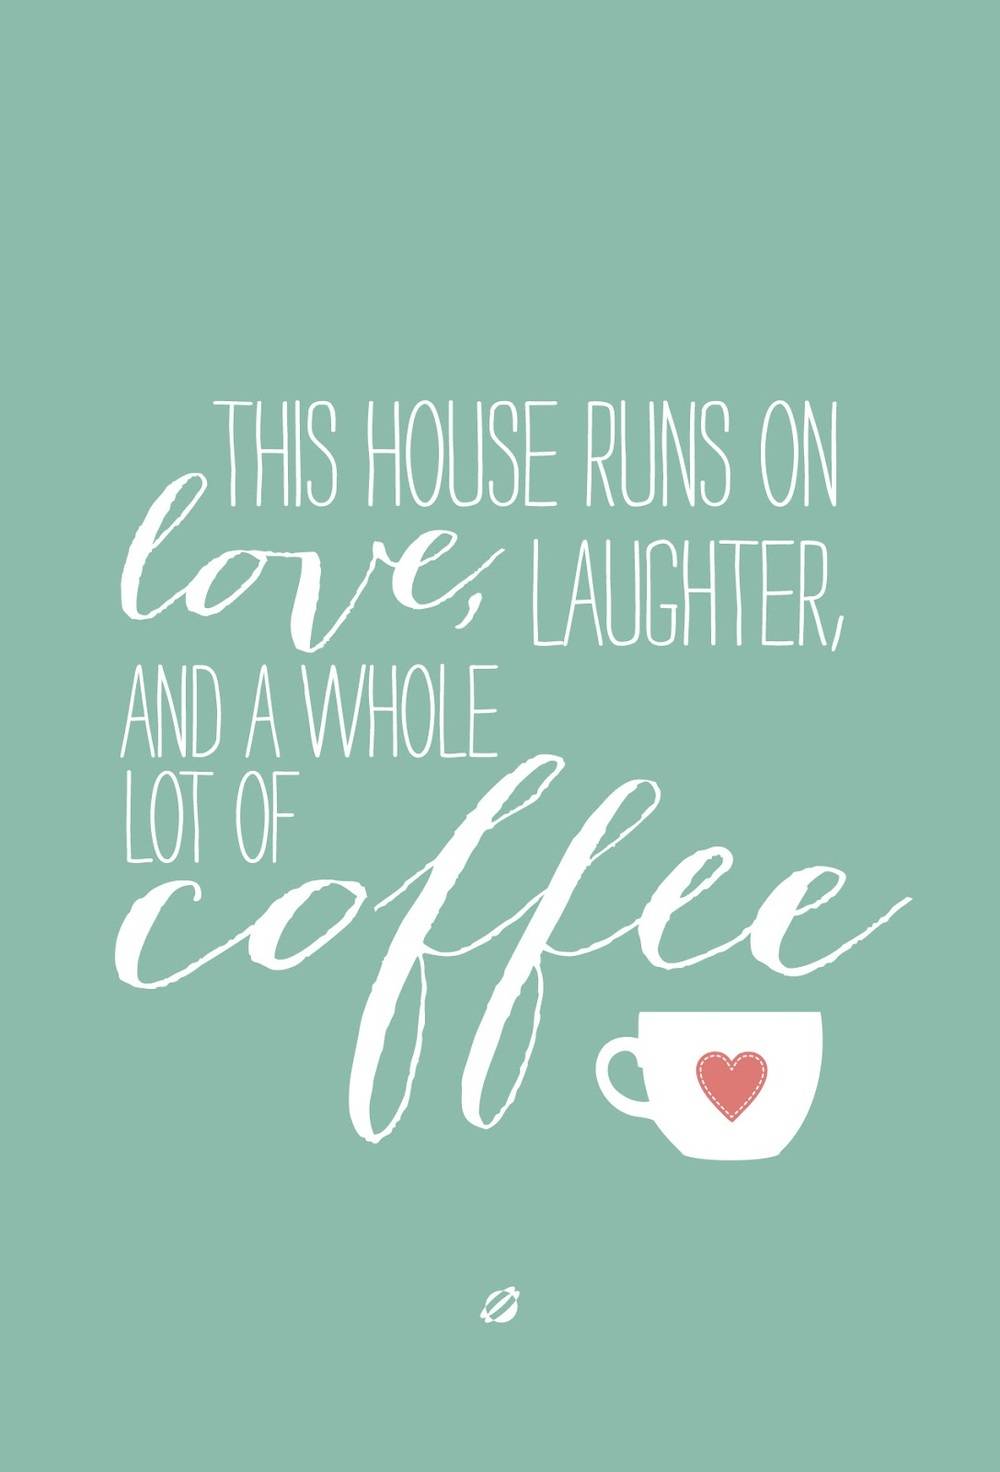 This house runs on Love, laughter and a whole lot of coffee.